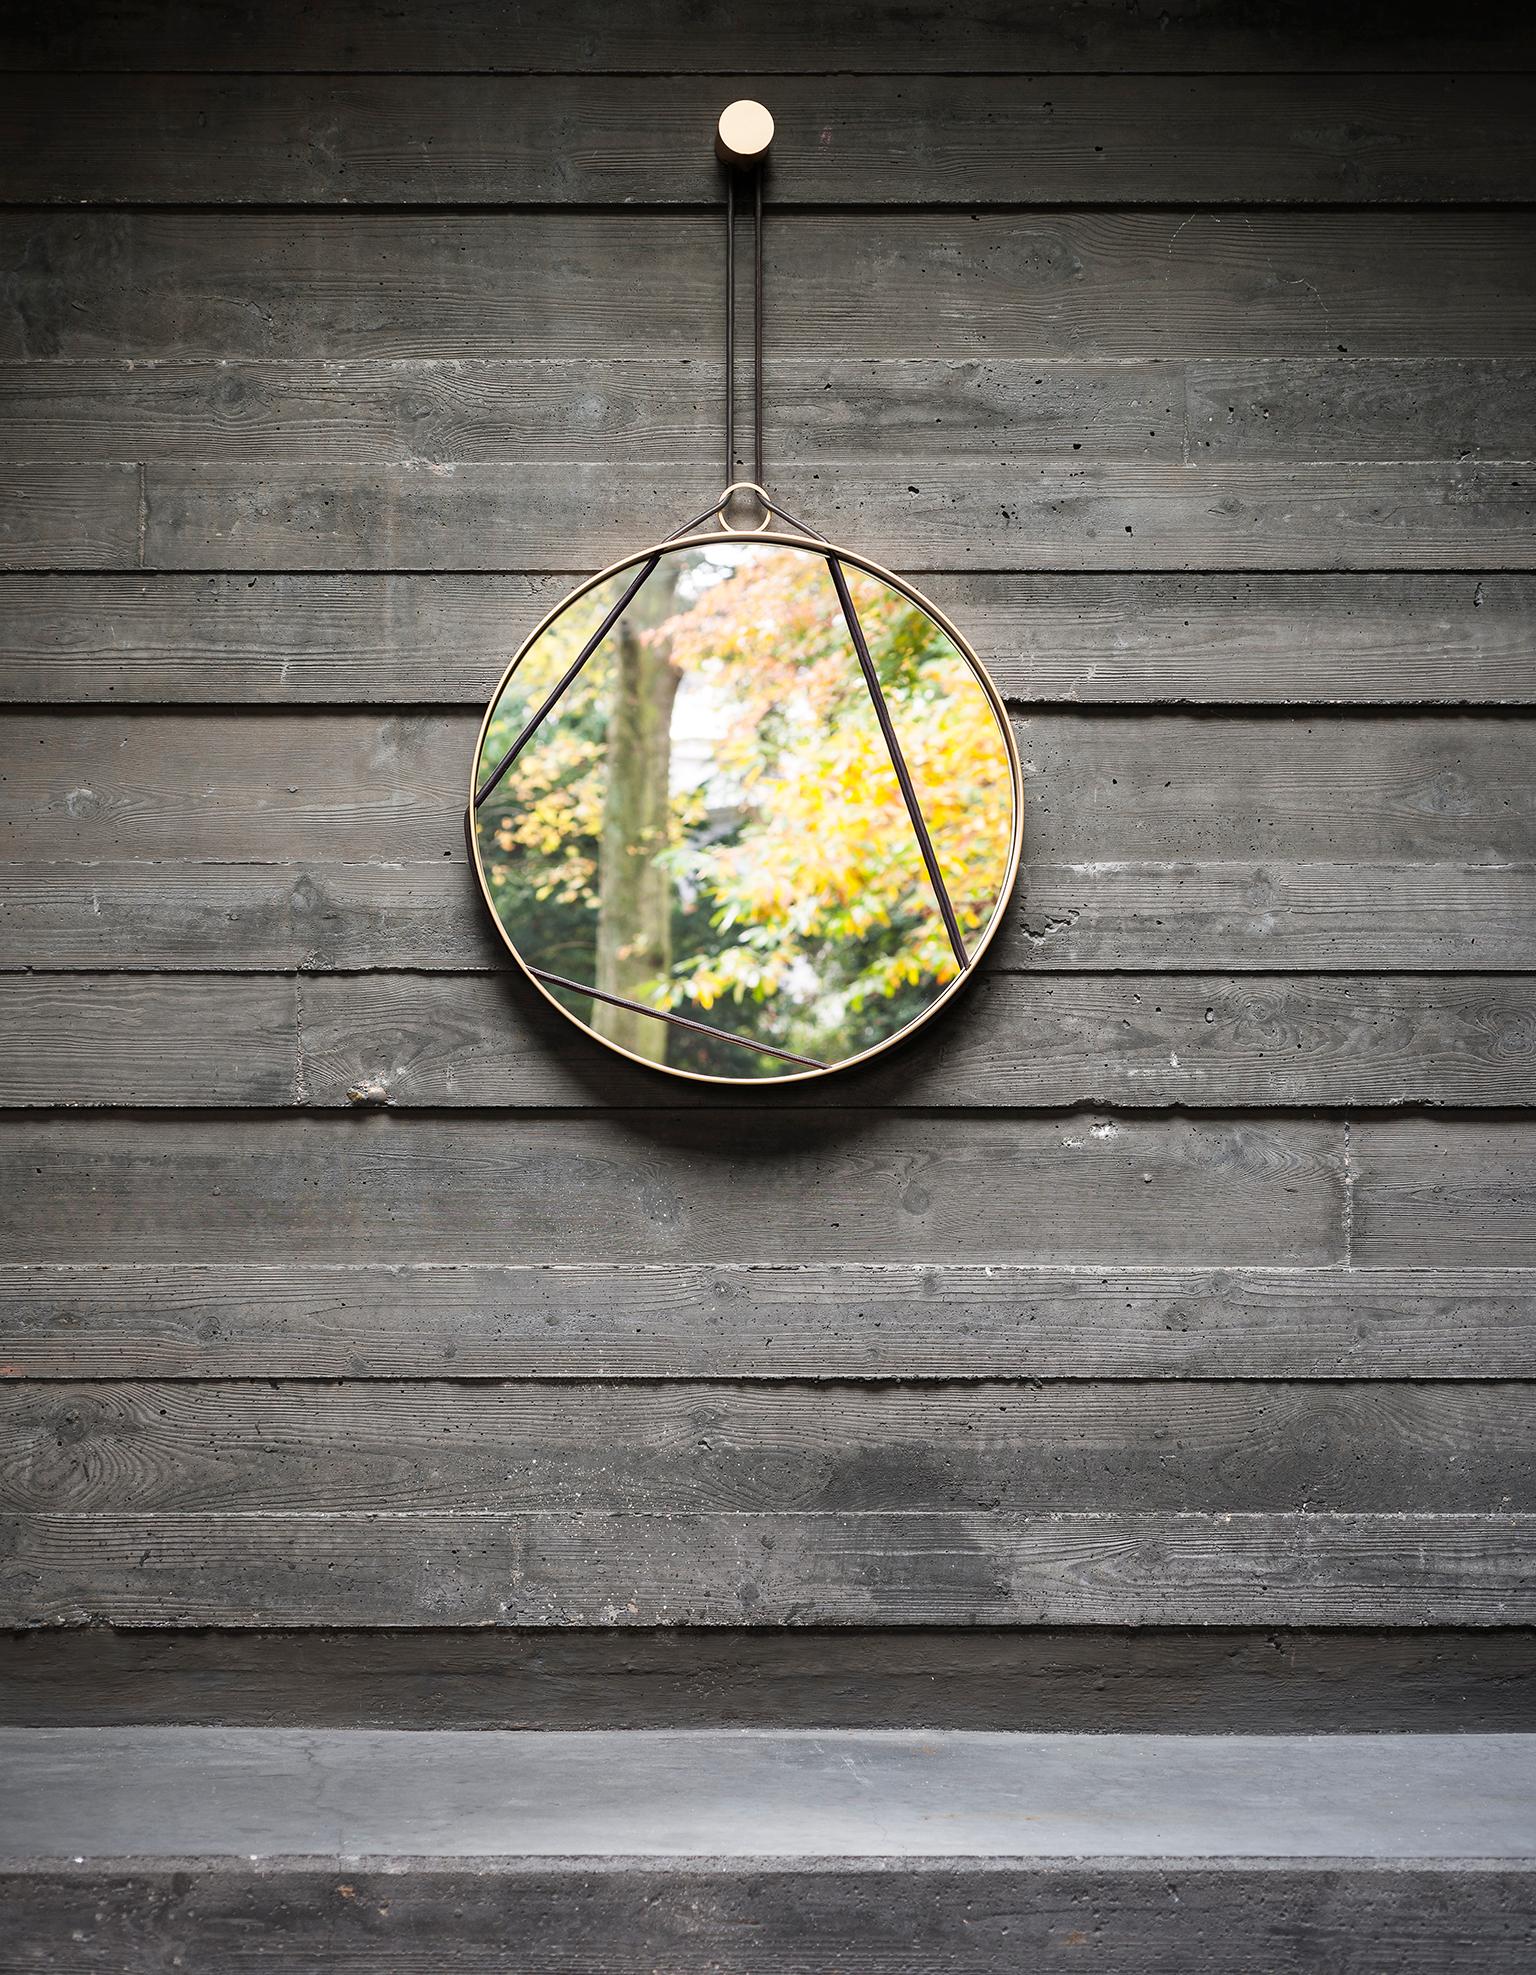 The mirror is an object filled with meaning, an object and, at the same time, a reflection: just like a jewel which is both an ornament and the reflection of a personality. Inspired by this similarity, Giorgio Bonaguro designed the Soleil mirror